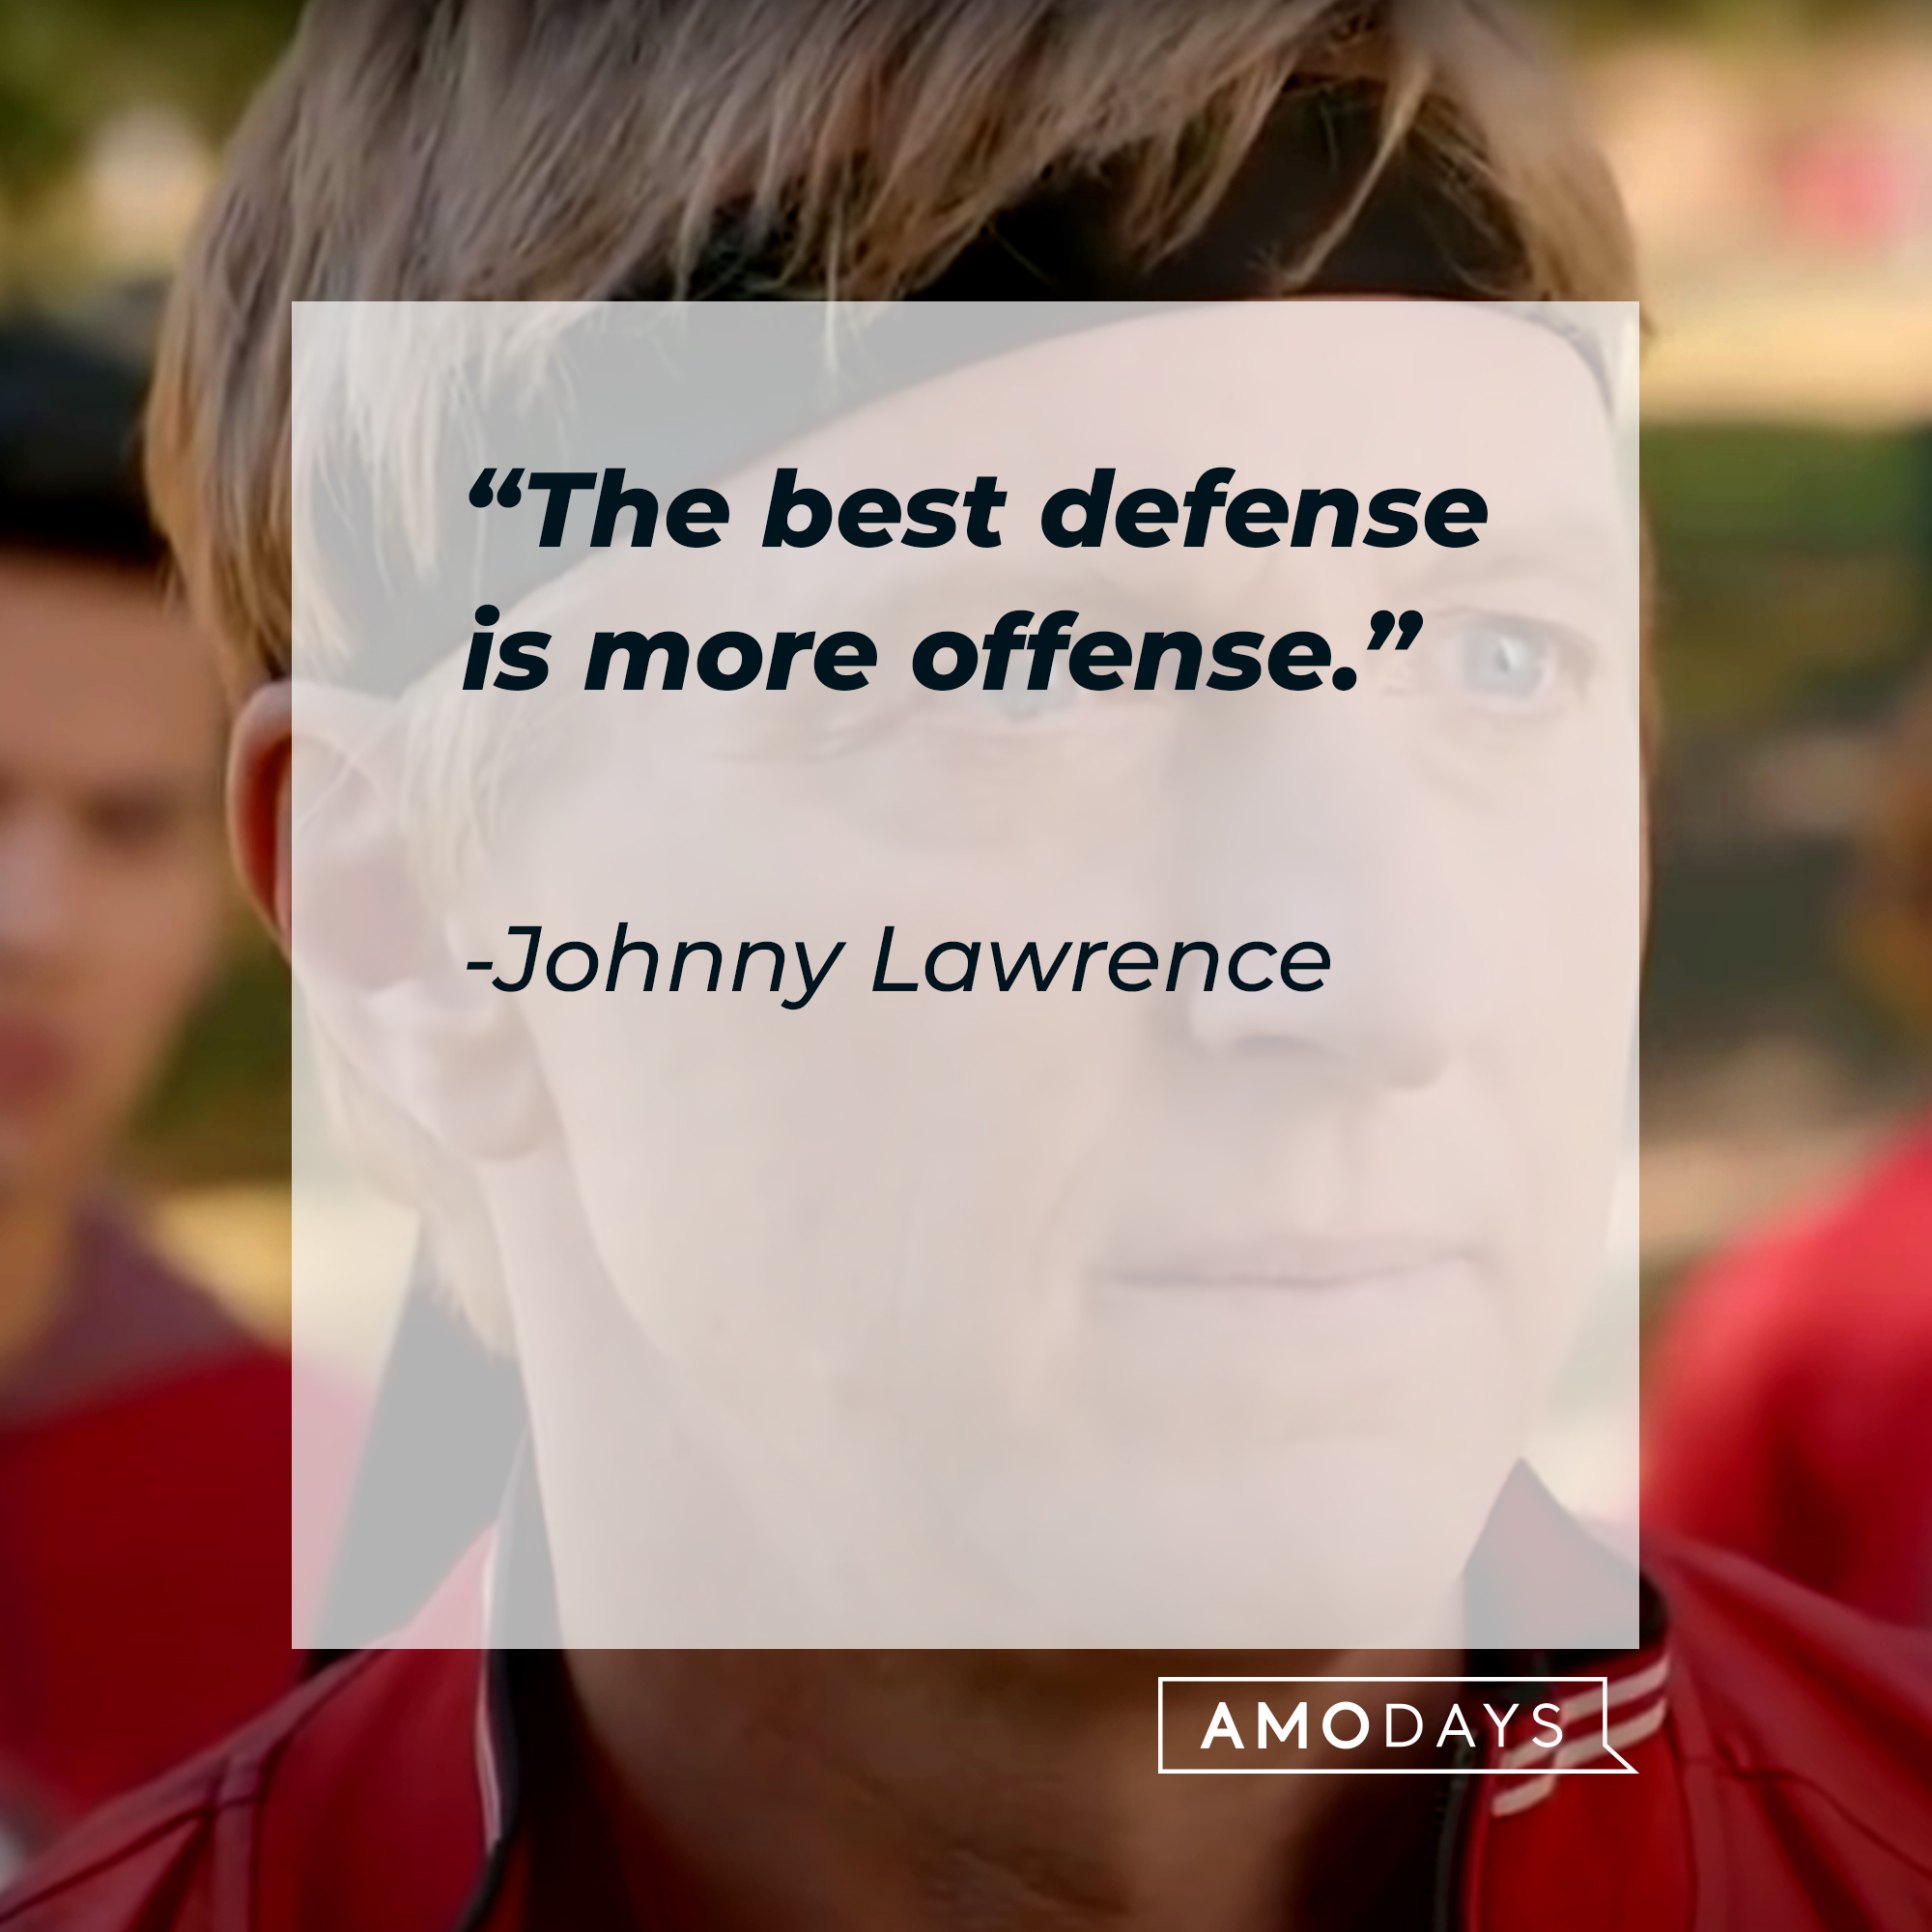 Johnny Lawrence, with his quote: “The best defense is more offense.” | Source: facebook.com/CobraKaiSeries